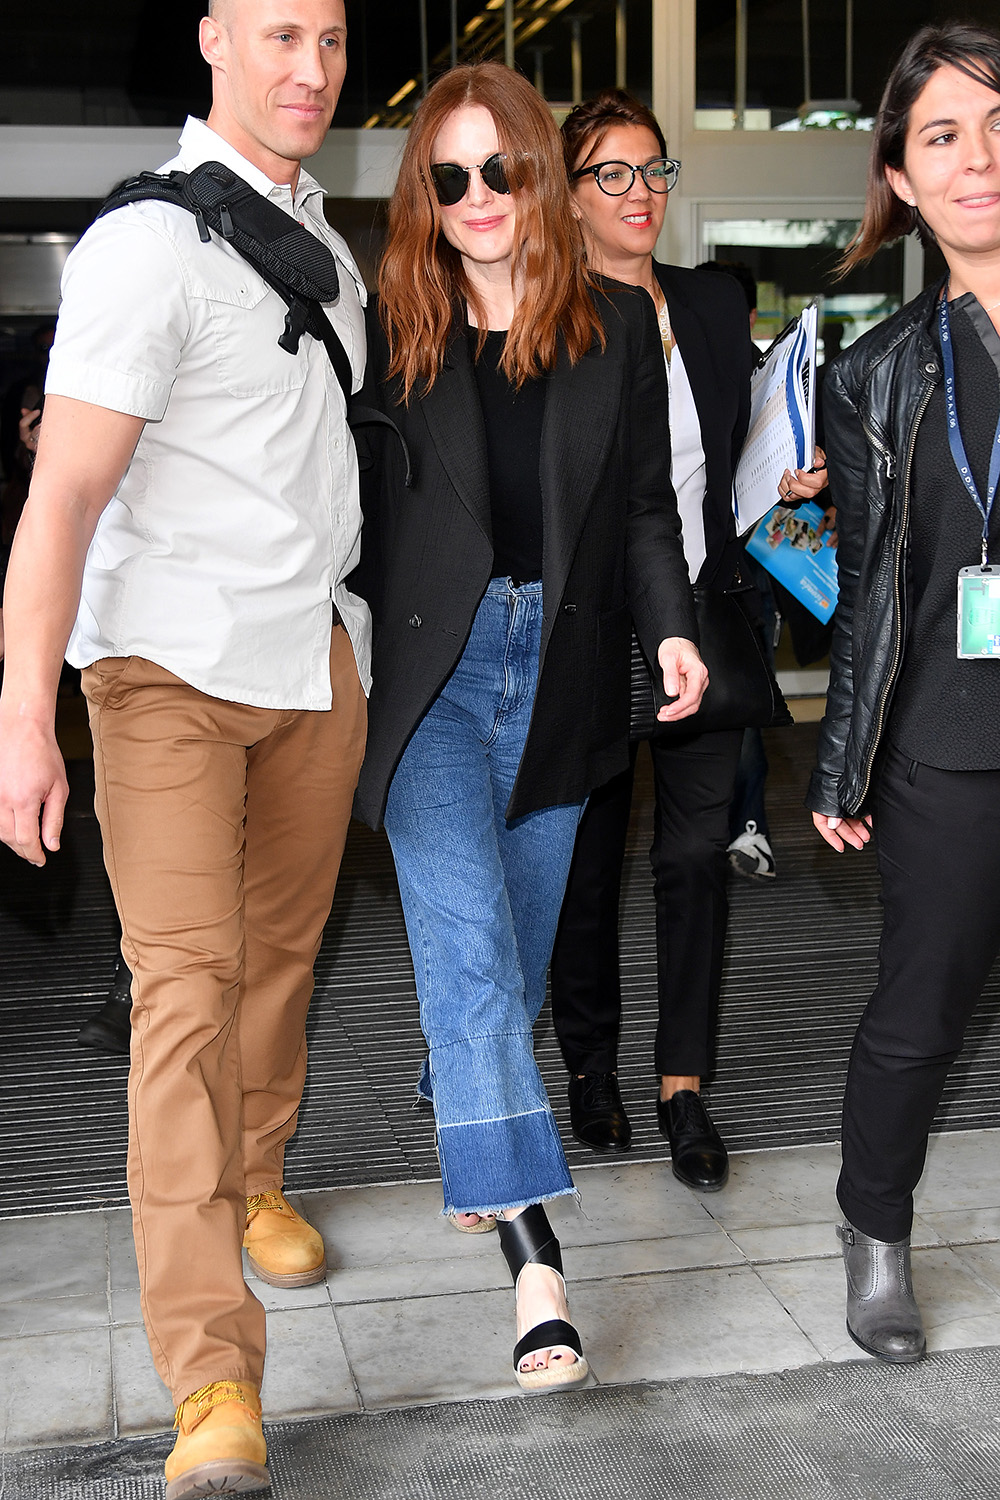 Julianne Moore shows off her classic style in a black blazer and pair of on trend frayed denim jeans in France.